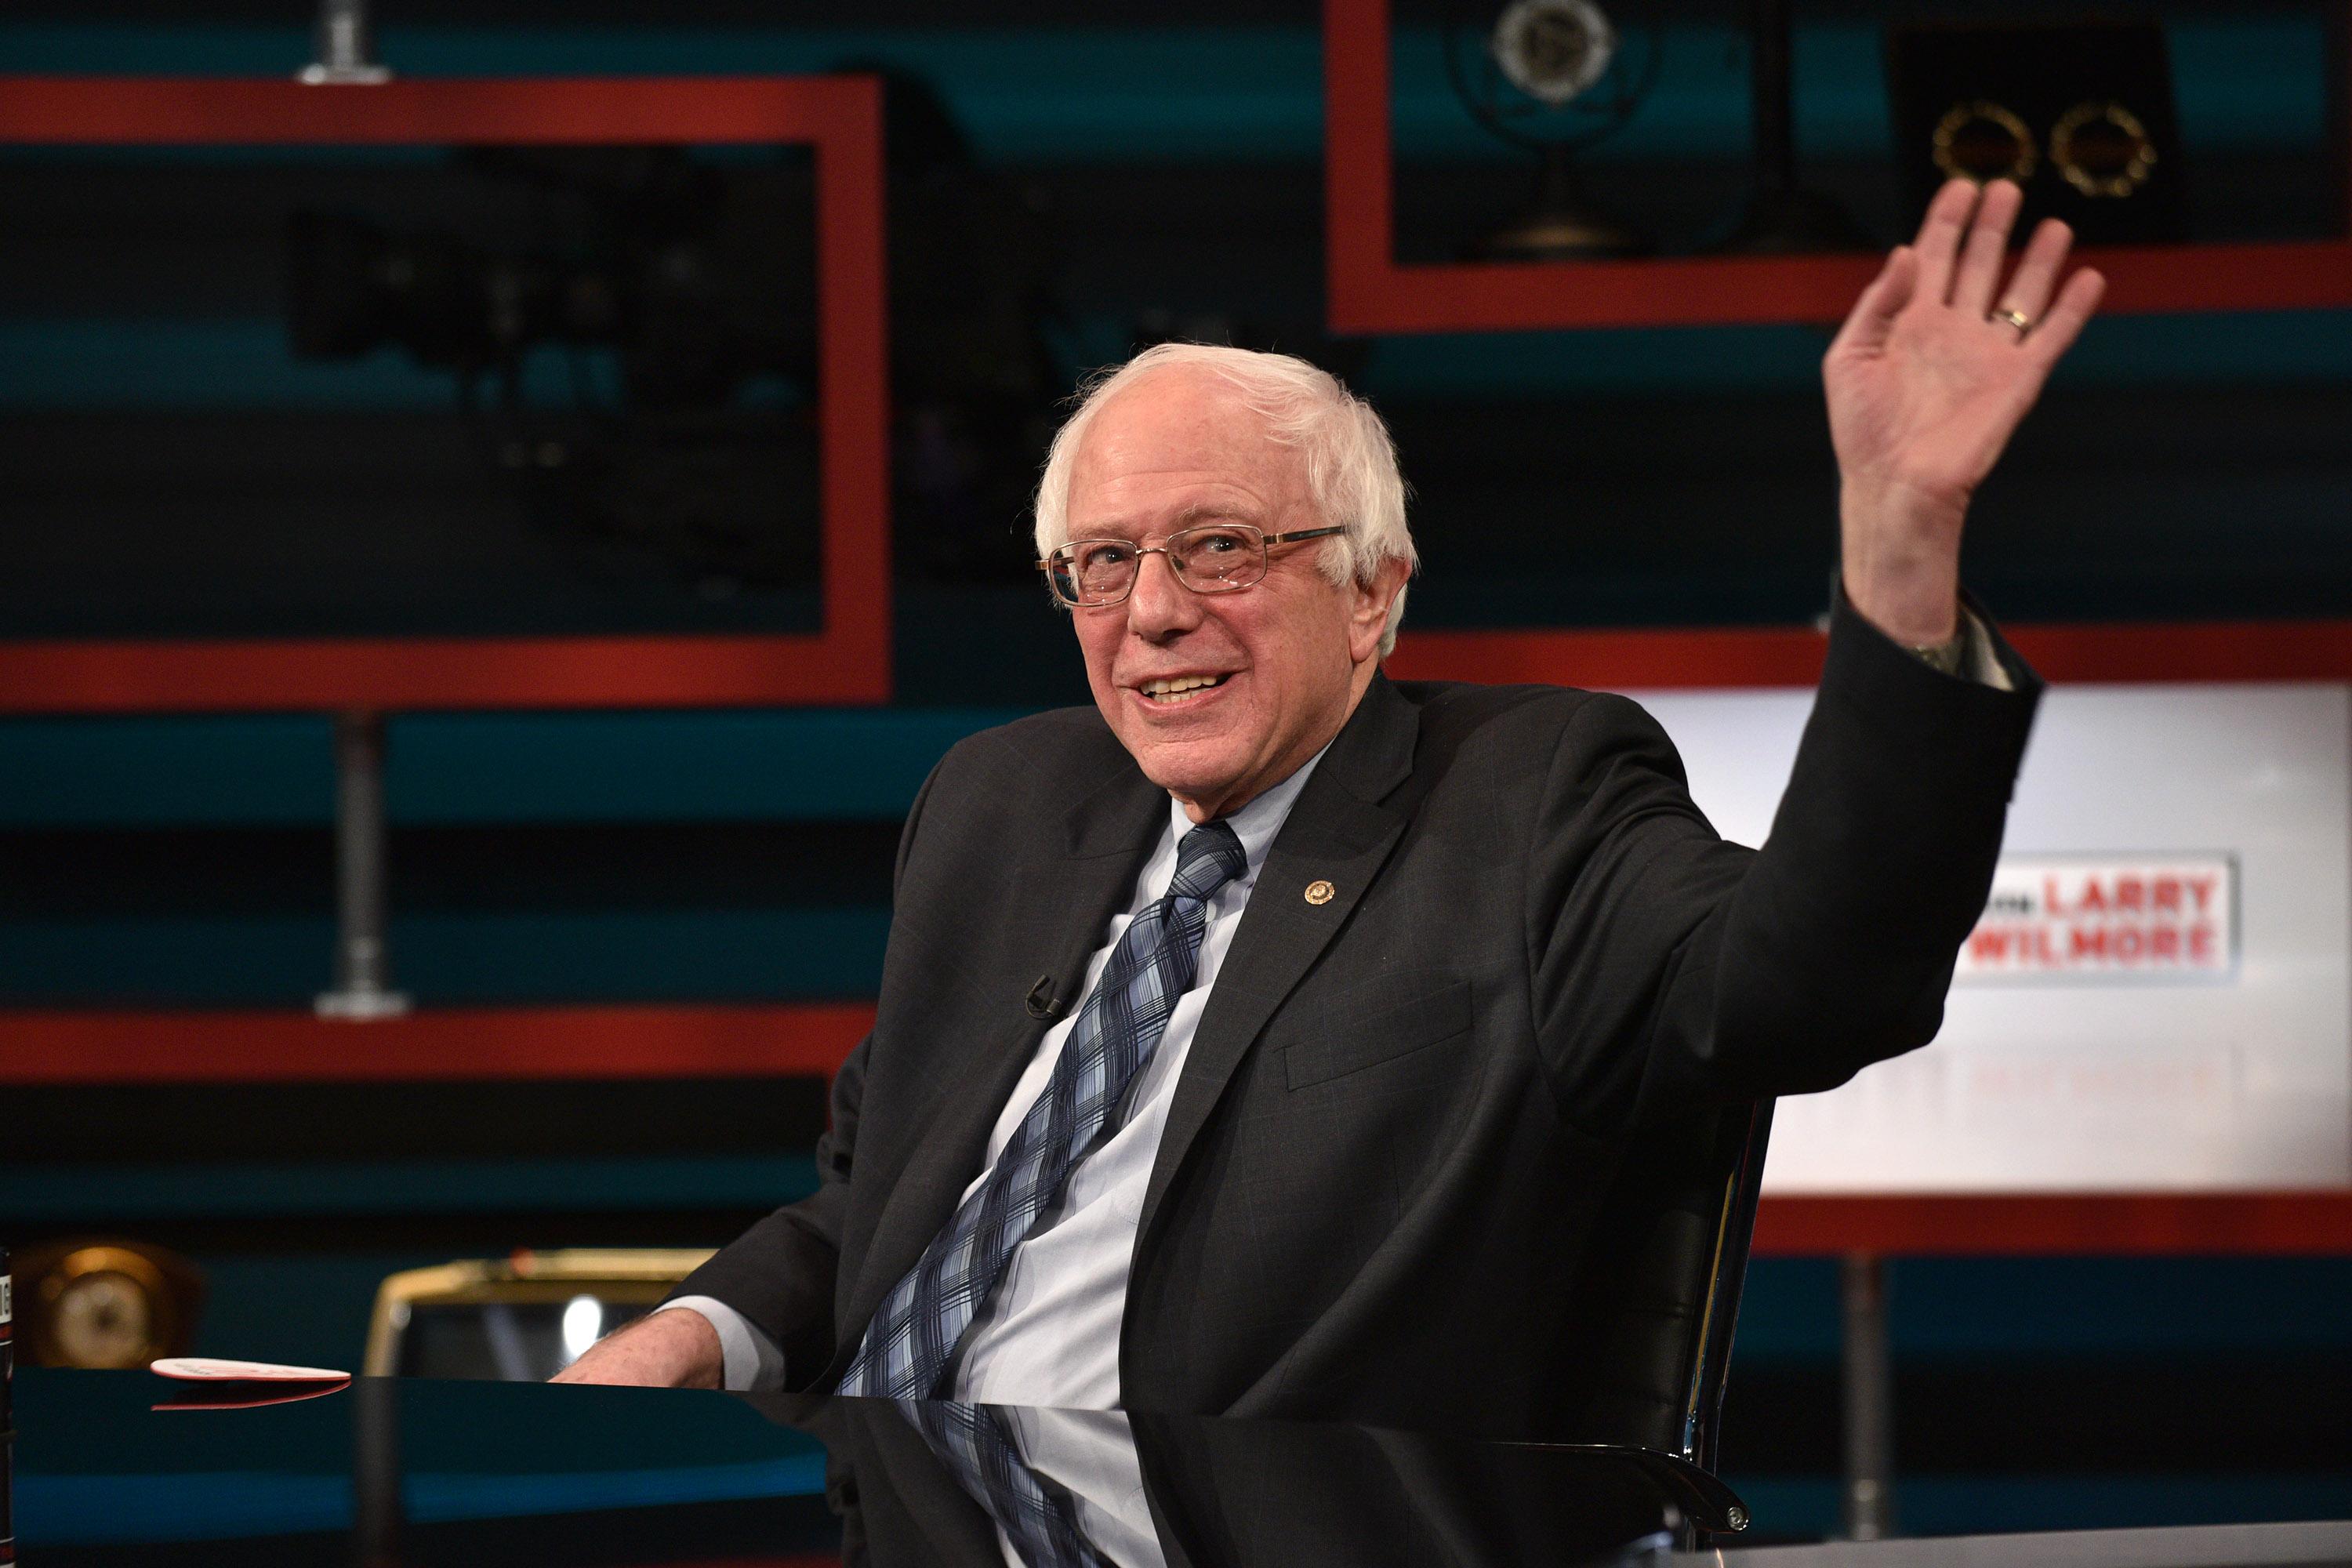 "The Nightly Show With Larry Wilmore" Welcomes Senator Bernie Sanders As Guest On Tuesday, January 5, 2016